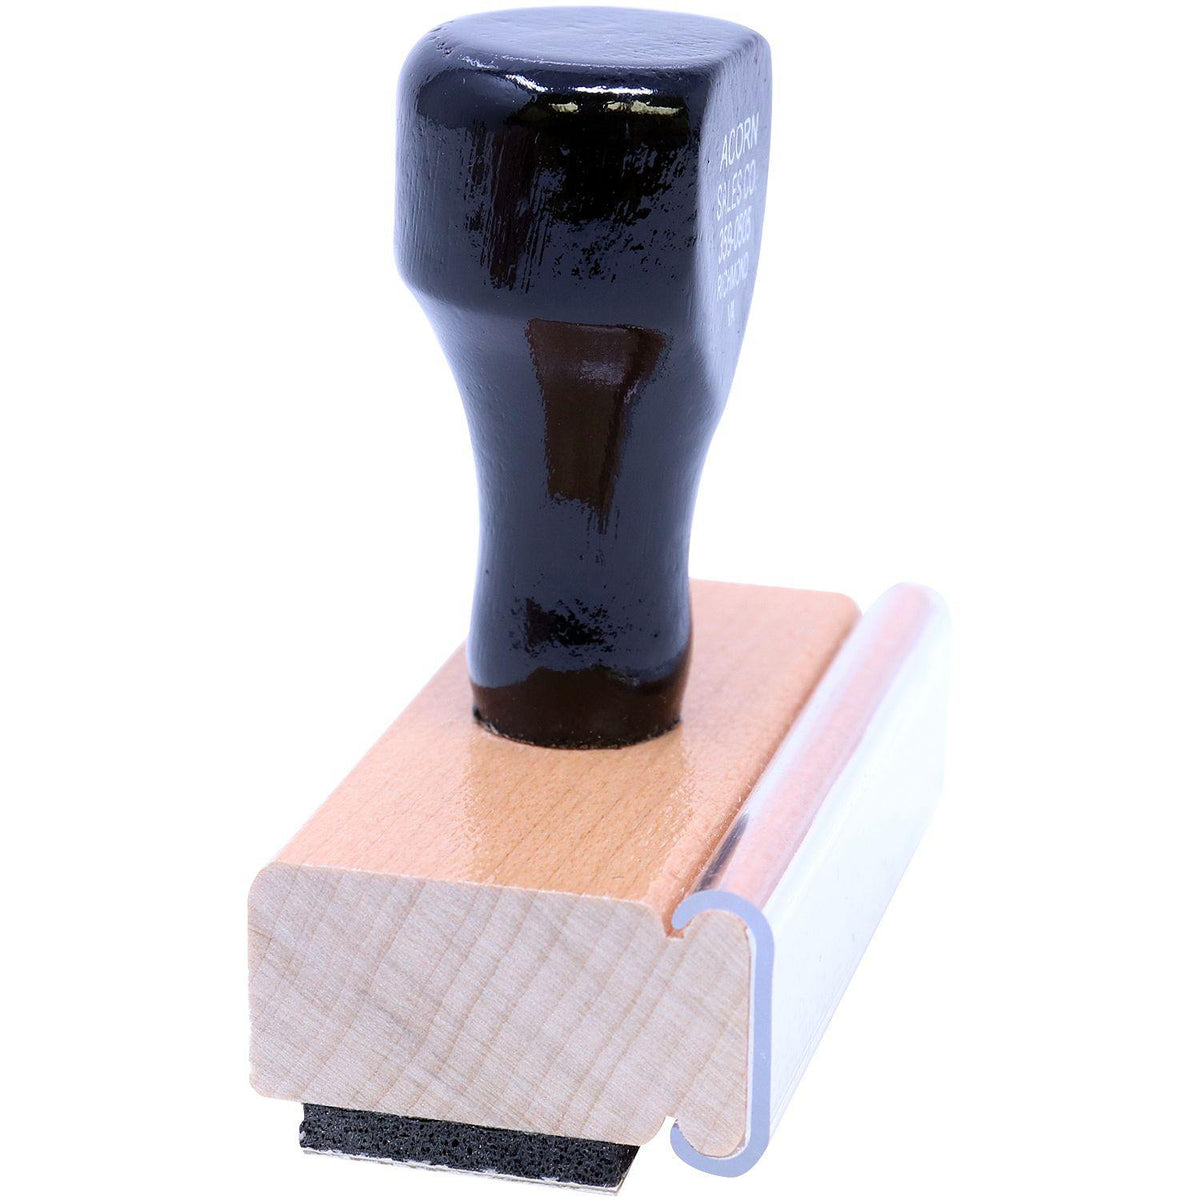 Side View of Copy Rubber Stamp at an Angle